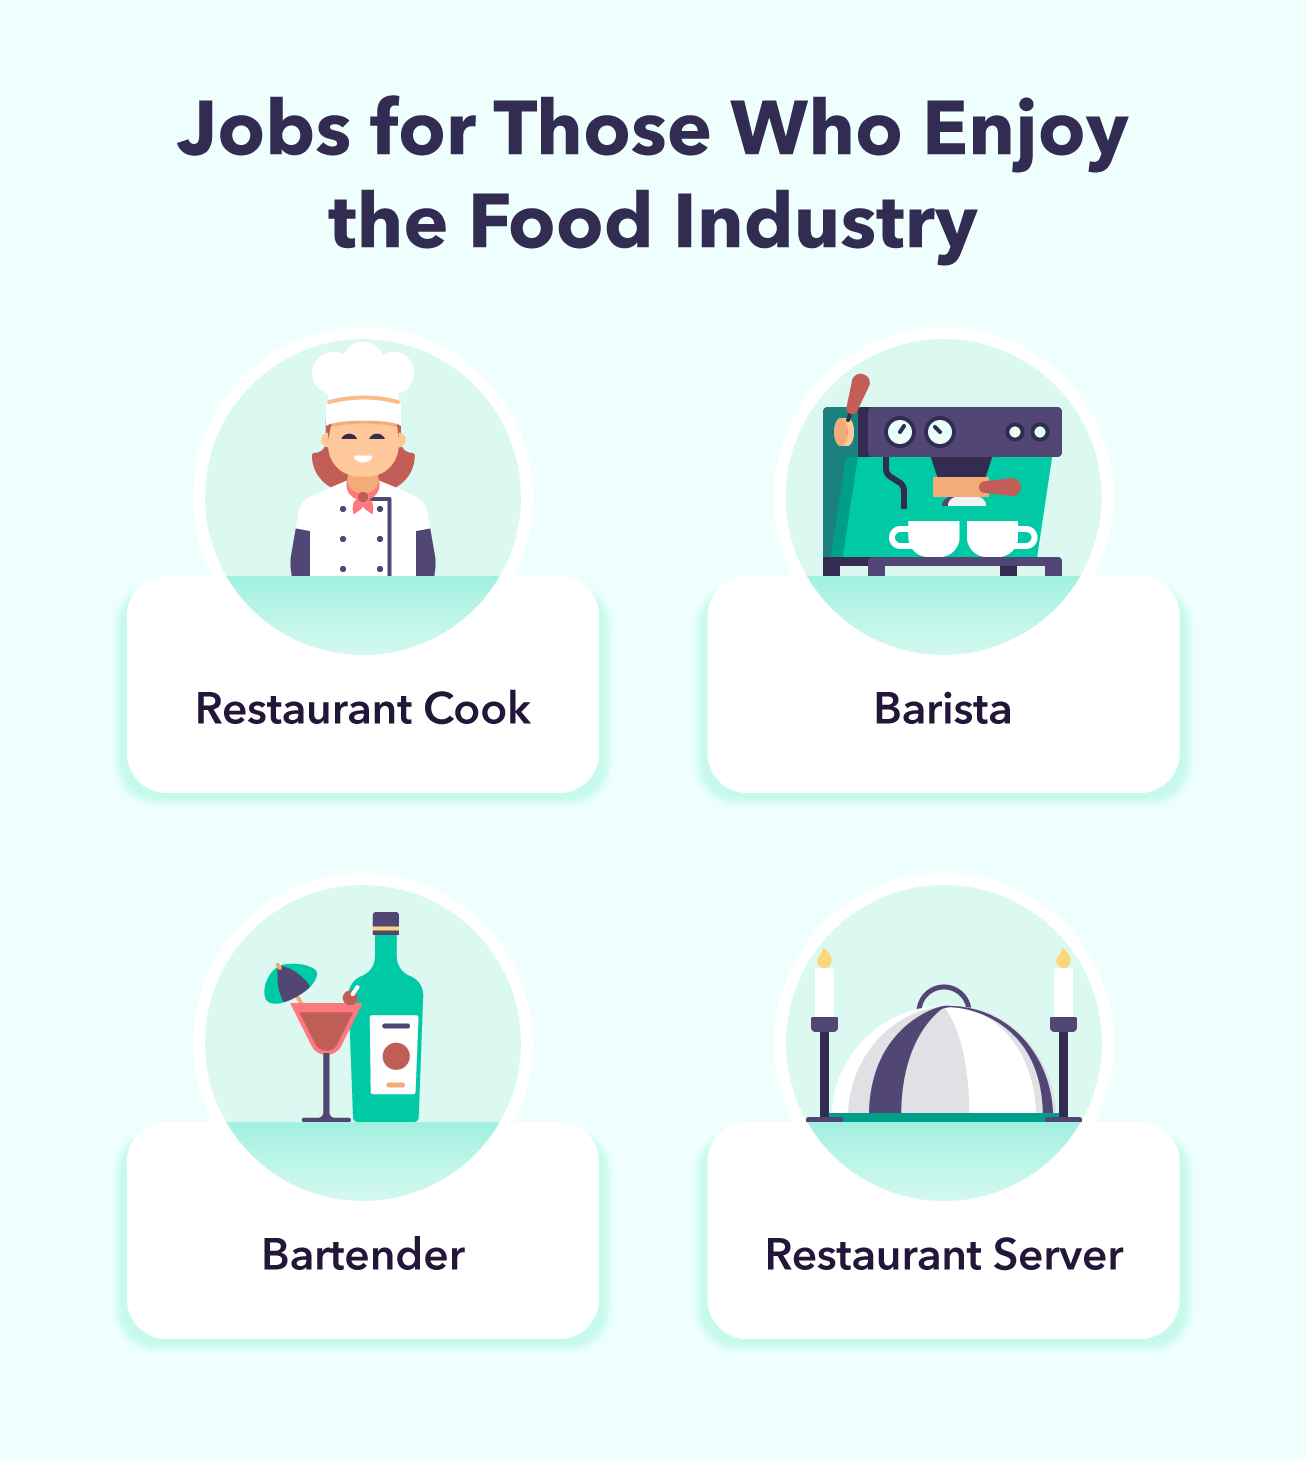 A graphic lists 4 summer job ideas for those who enjoy the food industry.